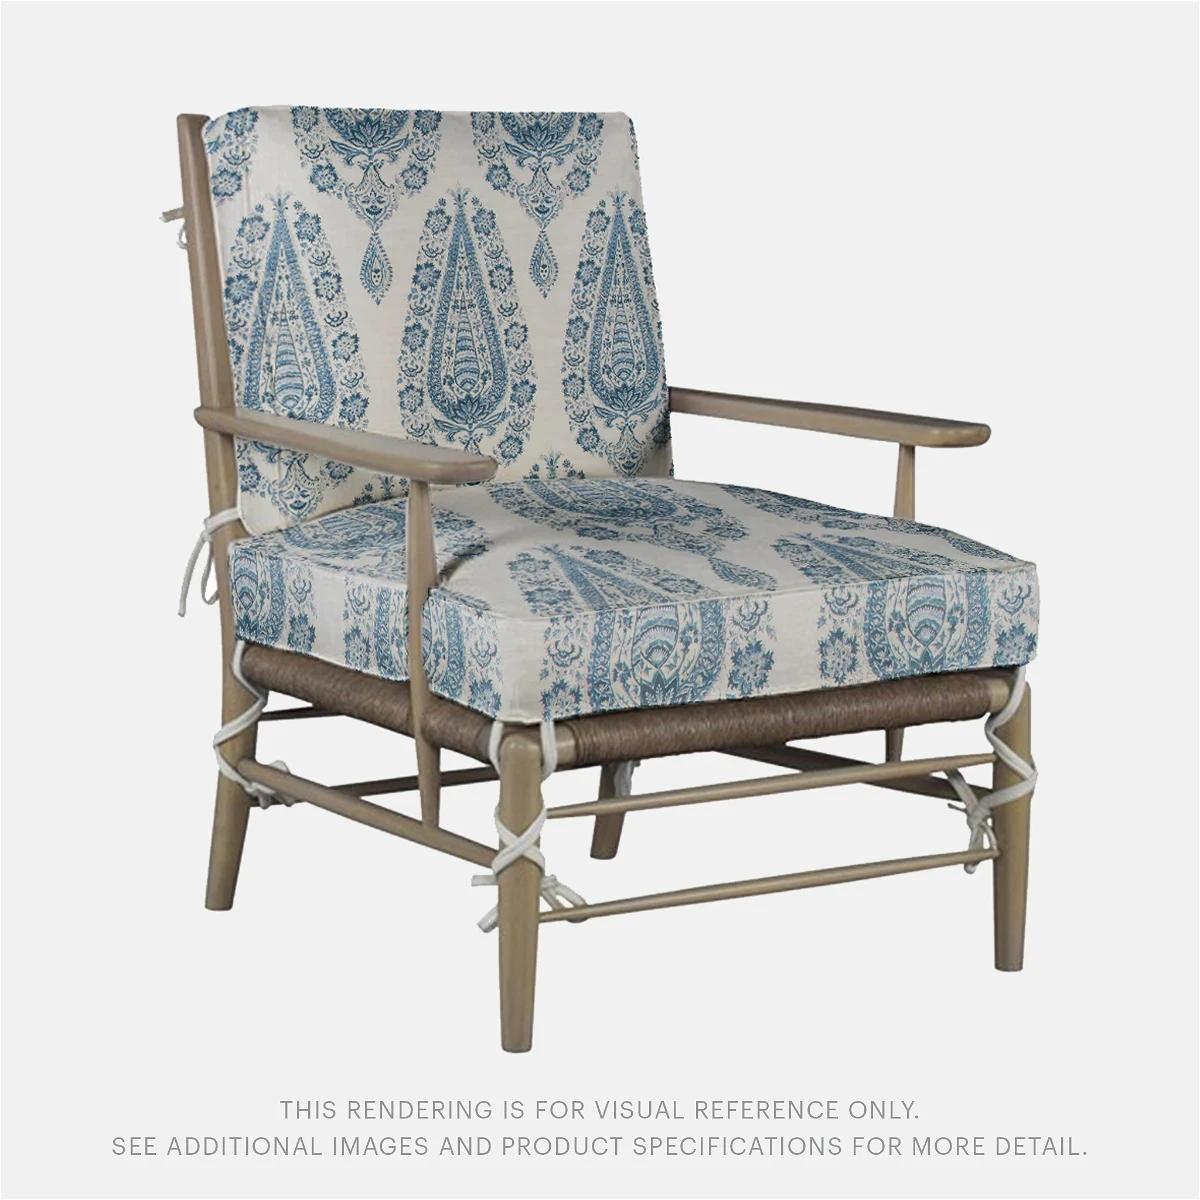 The image of an Ivy Lounge Chair product